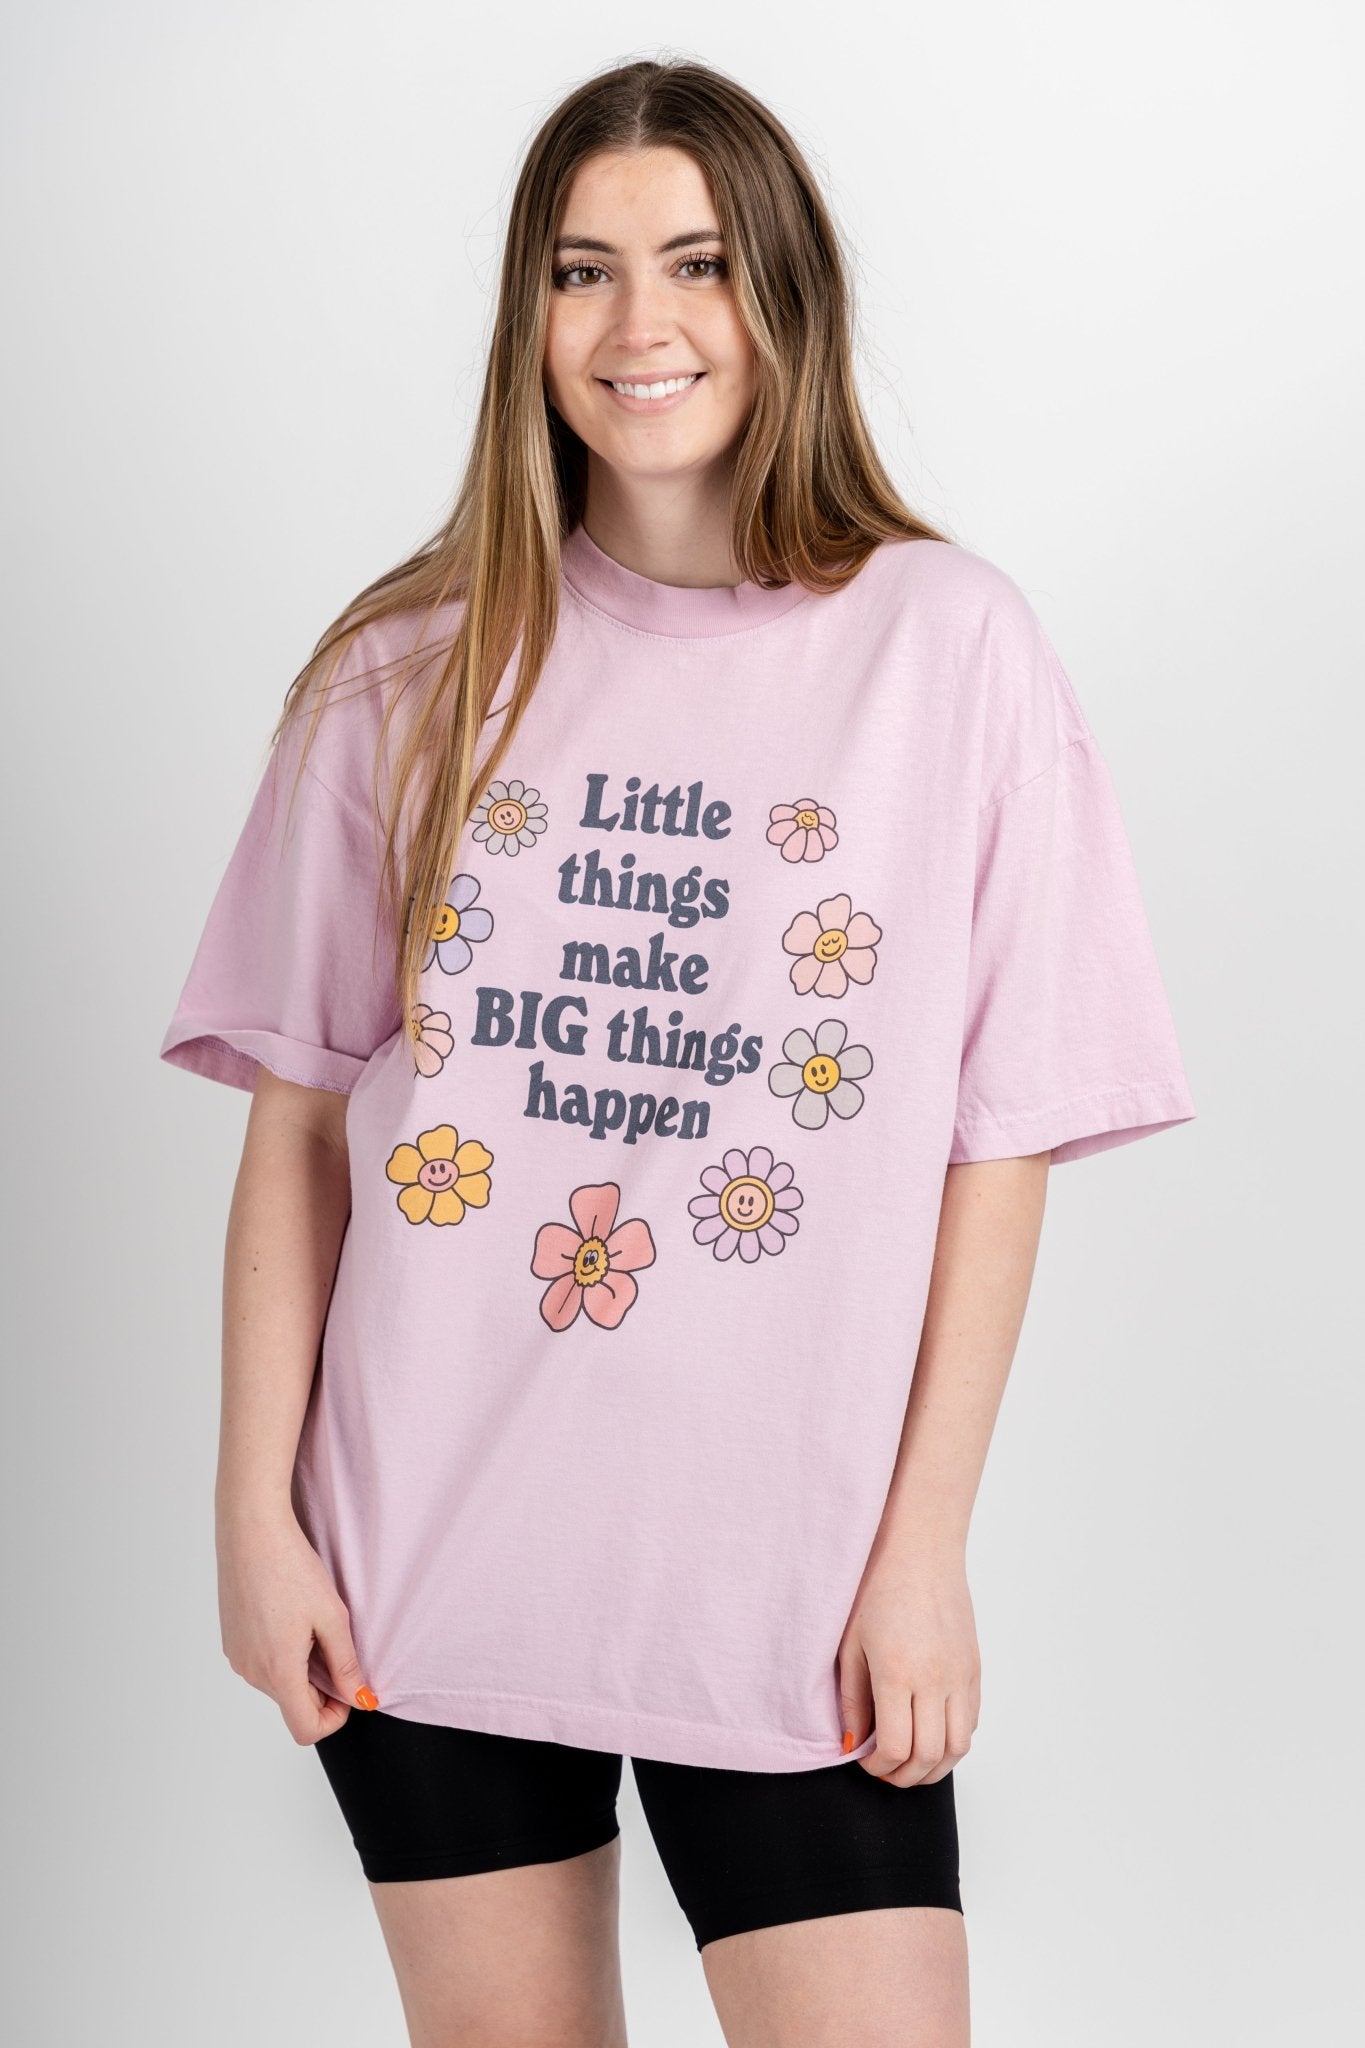 Little things make big things happen oversized graphic tee pink